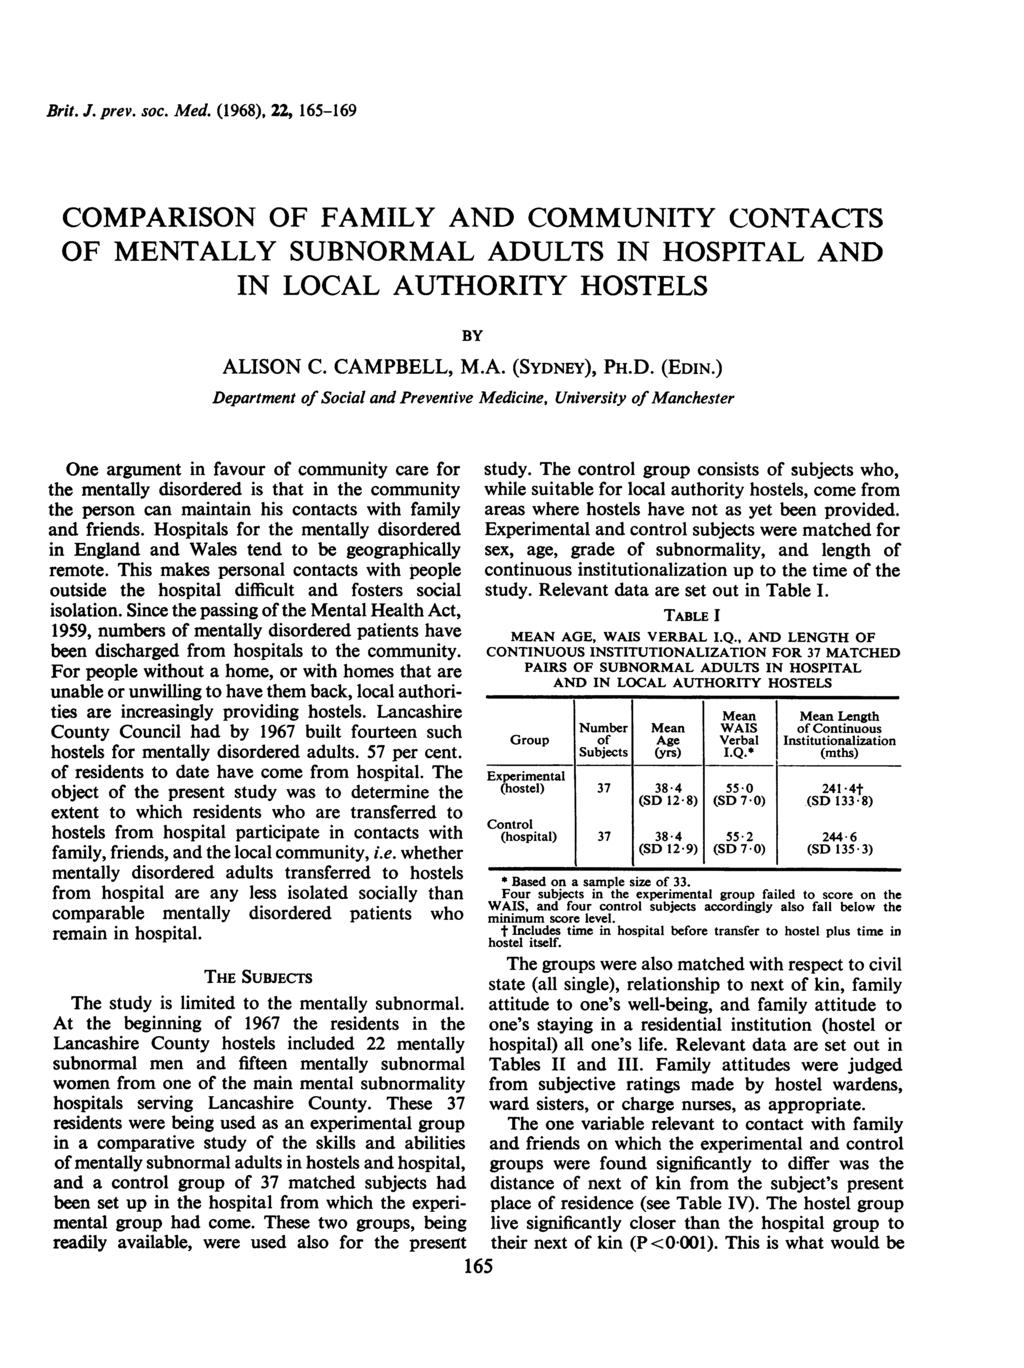 Brit. J. prev. soc. Med. (1968), 22, 165-169 COMPARISON OF FAMILY AND COMMUNITY CONTACTS OF MENTALLY SUBNORMAL ADULTS IN HOSPITAL AND IN LOCAL AUTHORITY HOSTELS BY ALISON C. CAMPBELL, M.A. (SYDNEY), PH.